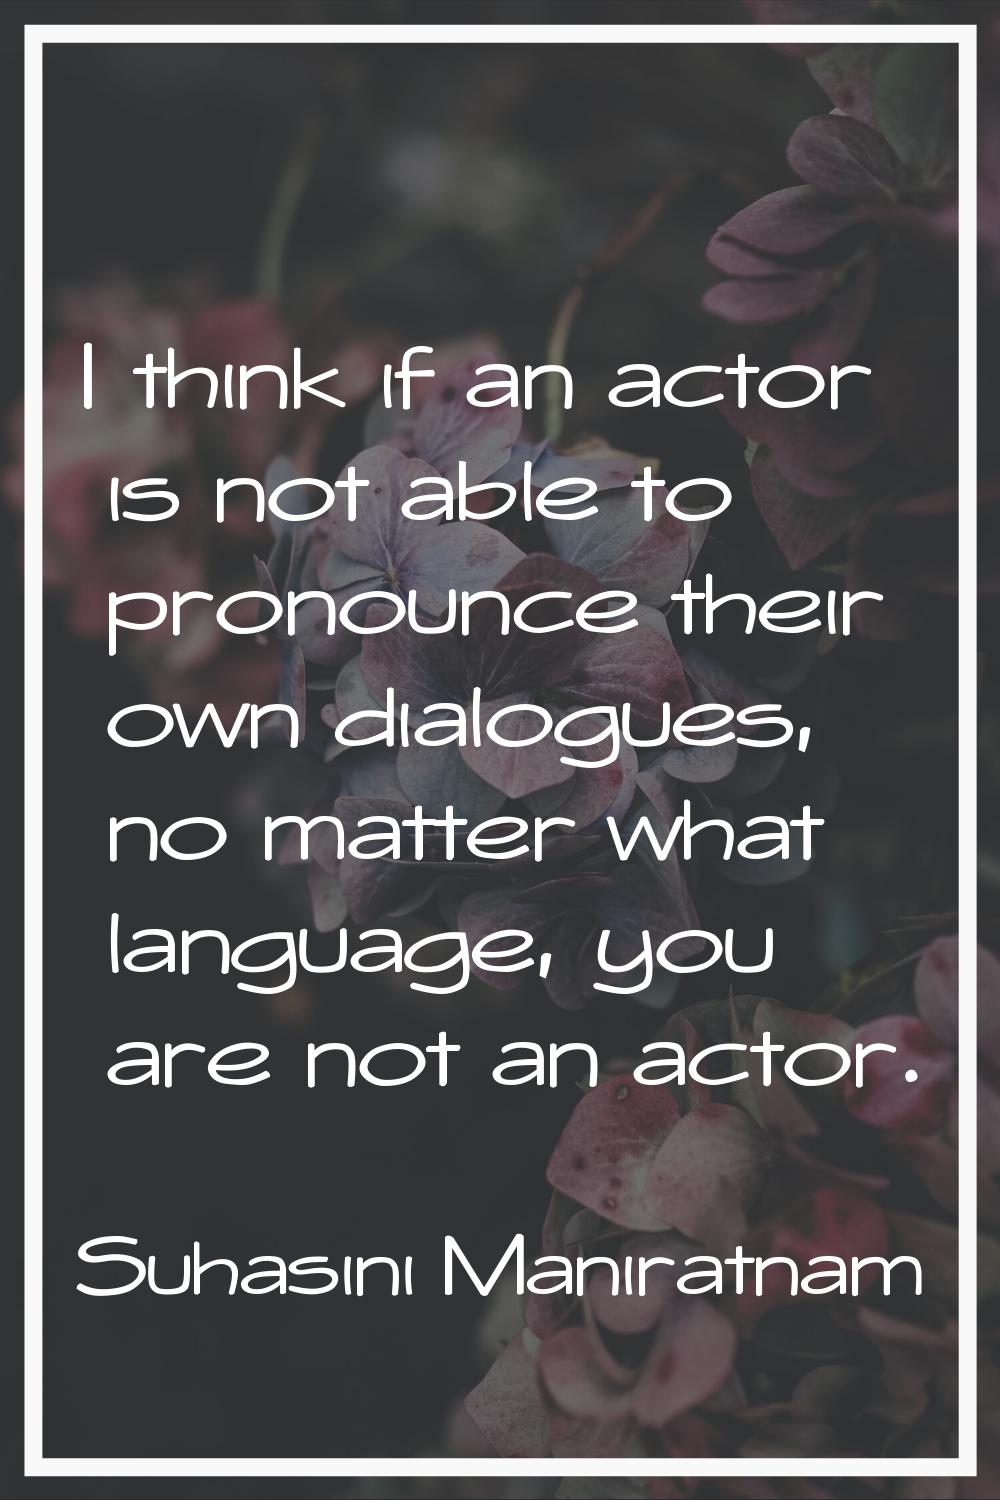 I think if an actor is not able to pronounce their own dialogues, no matter what language, you are 